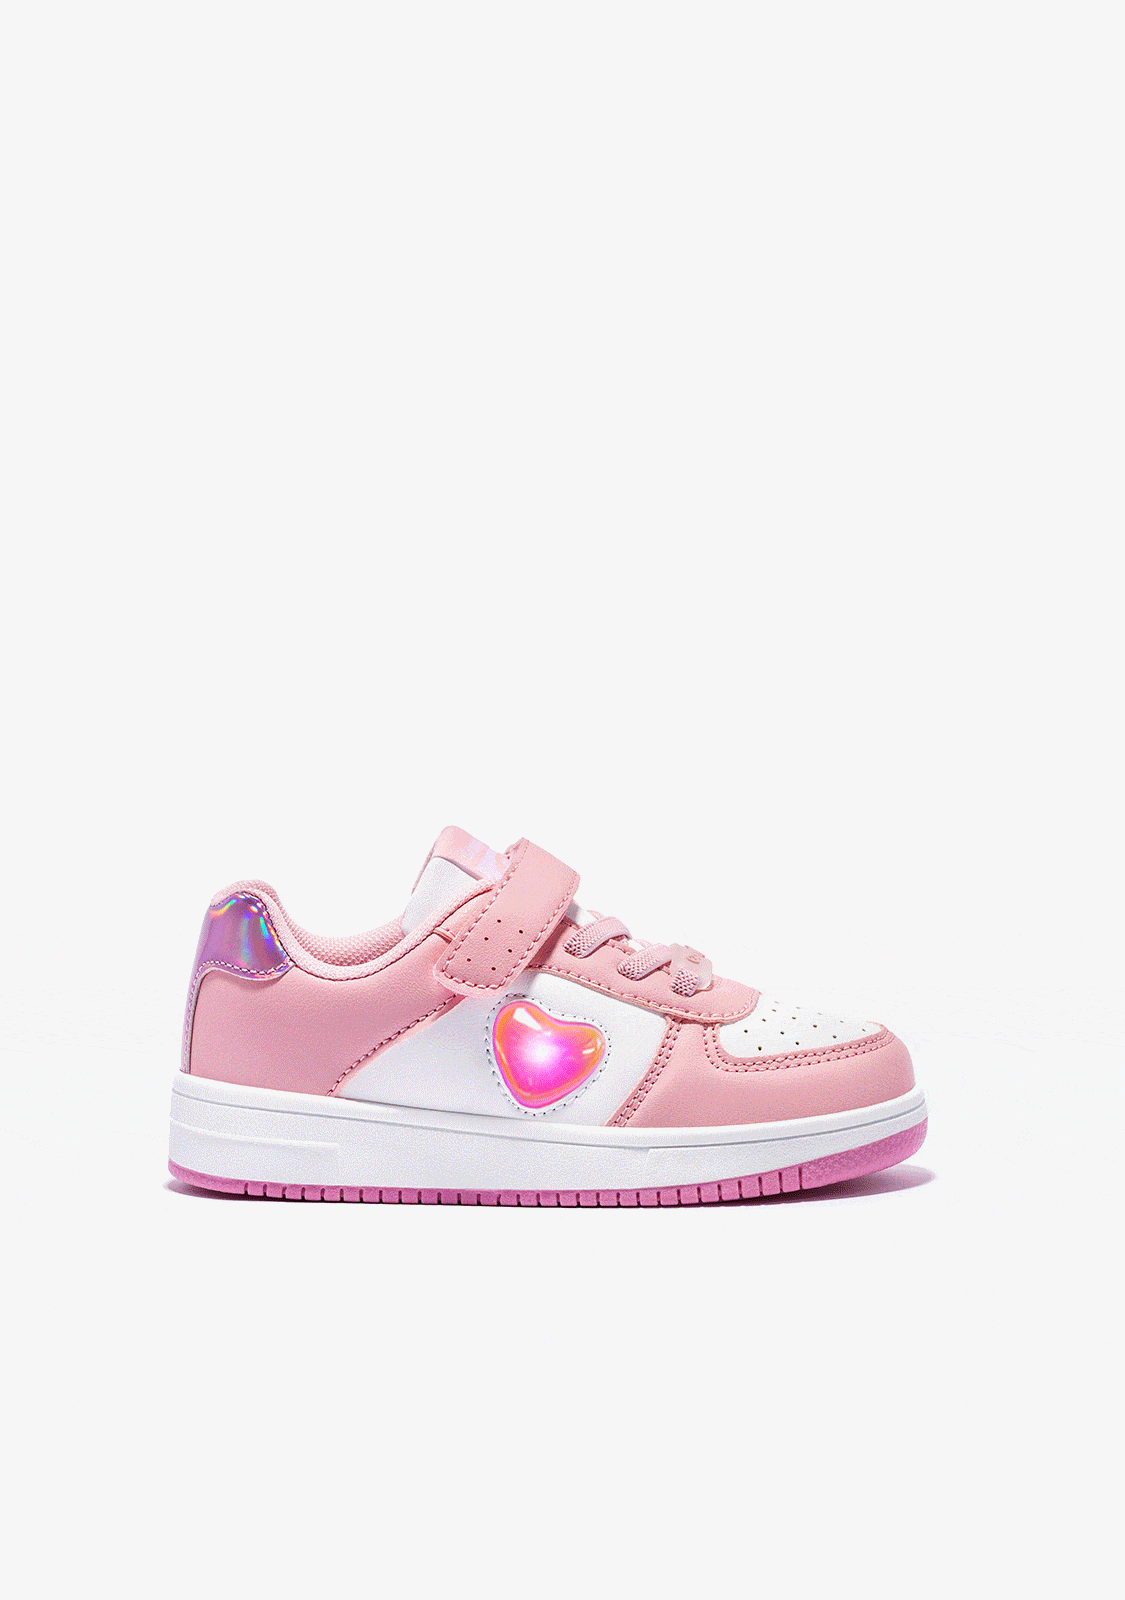 Conguitos SHOES Pink With Lights Colour Changing Heart Sneakers